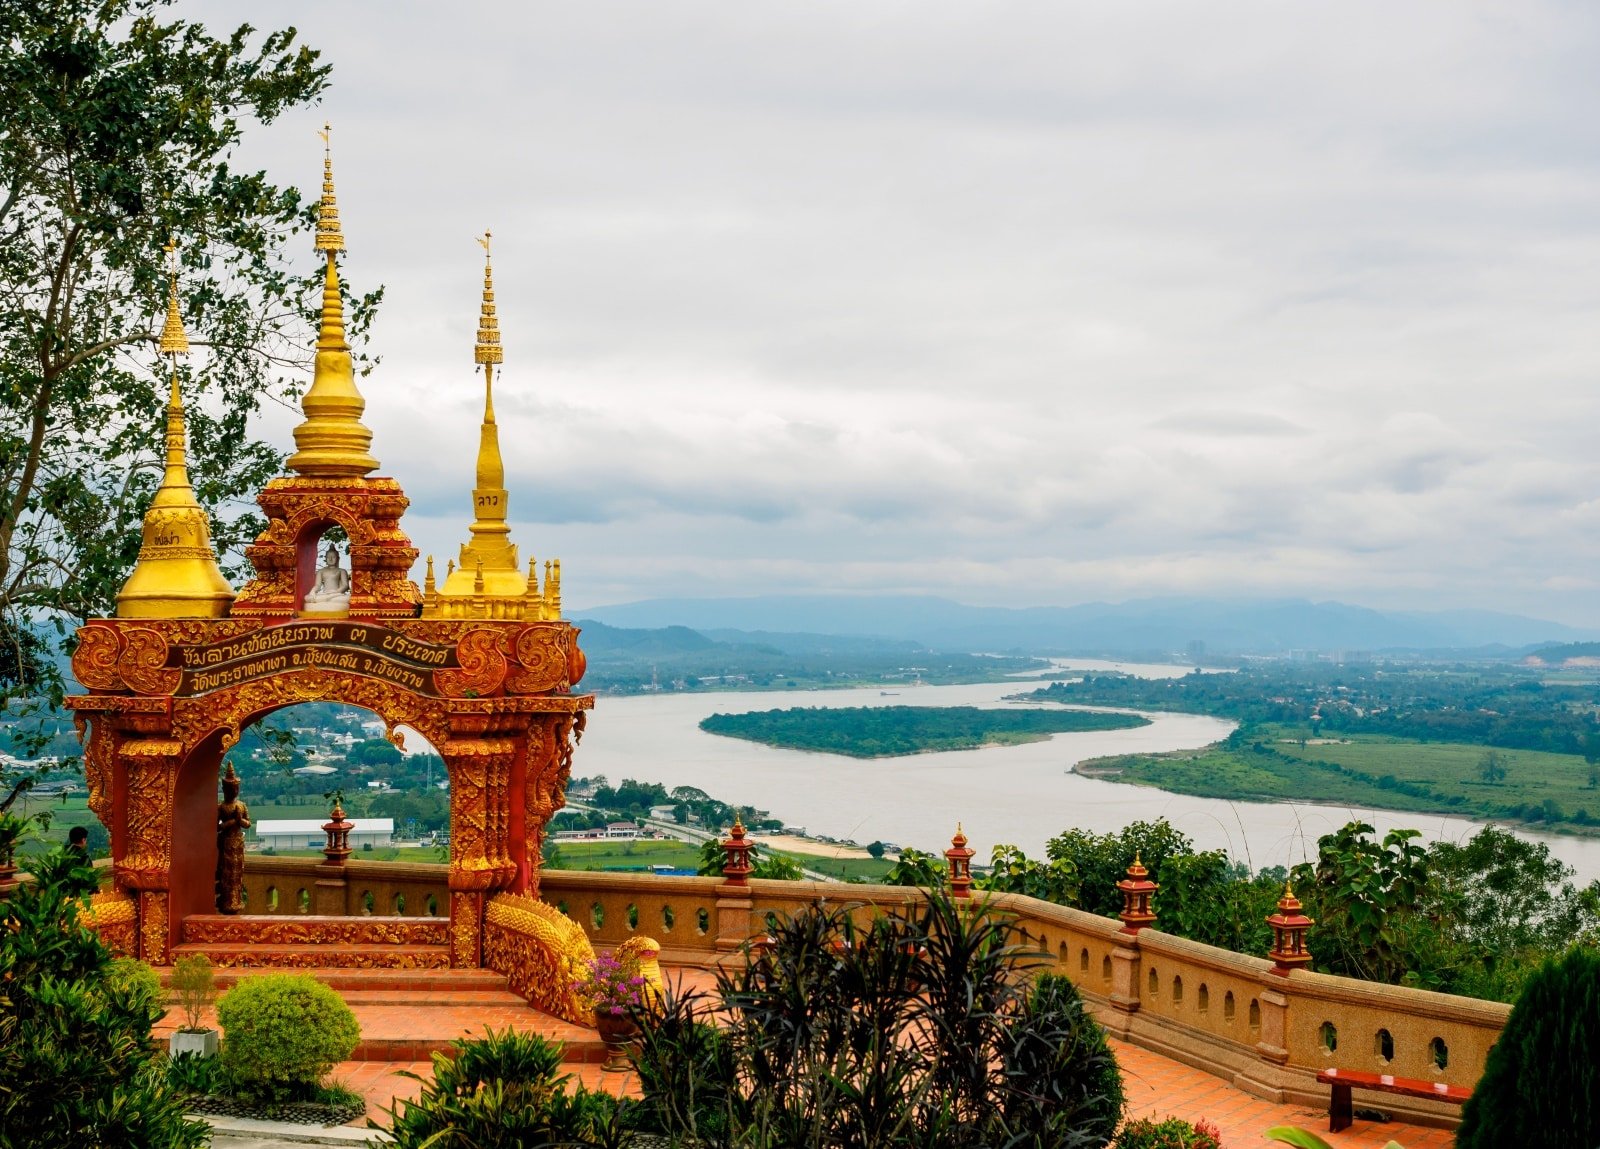 <p><span>The Golden Triangle, where the borders of Thailand, Laos, and Myanmar converge, offers a unique cultural and geographical experience. This area, once notorious for its opium production, now provides insights into the region’s history with attractions like the Hall of Opium Museum.</span></p> <p><span>A boat ride on the Mekong River is a serene way to experience the beauty of this area and the confluence of the three countries. The ancient city of Chiang Saen nearby, with its ruins and temples, adds a historical dimension to your visit. The Golden Triangle’s cultural influences and stunning landscapes make it a fascinating destination in Northern Thailand.</span></p> <p><b>Insider’s Tip: </b><span>For a panoramic view of the three countries, visit the viewpoint at Wat Phra That Pu Khao.</span></p> <p><b>How To Get There: </b><span>The Golden Triangle is accessible by bus or car from Chiang Rai.</span></p> <p><b>Best Time To Travel: </b><span>The cool season, from November to February, offers comfortable weather for exploring.</span></p>